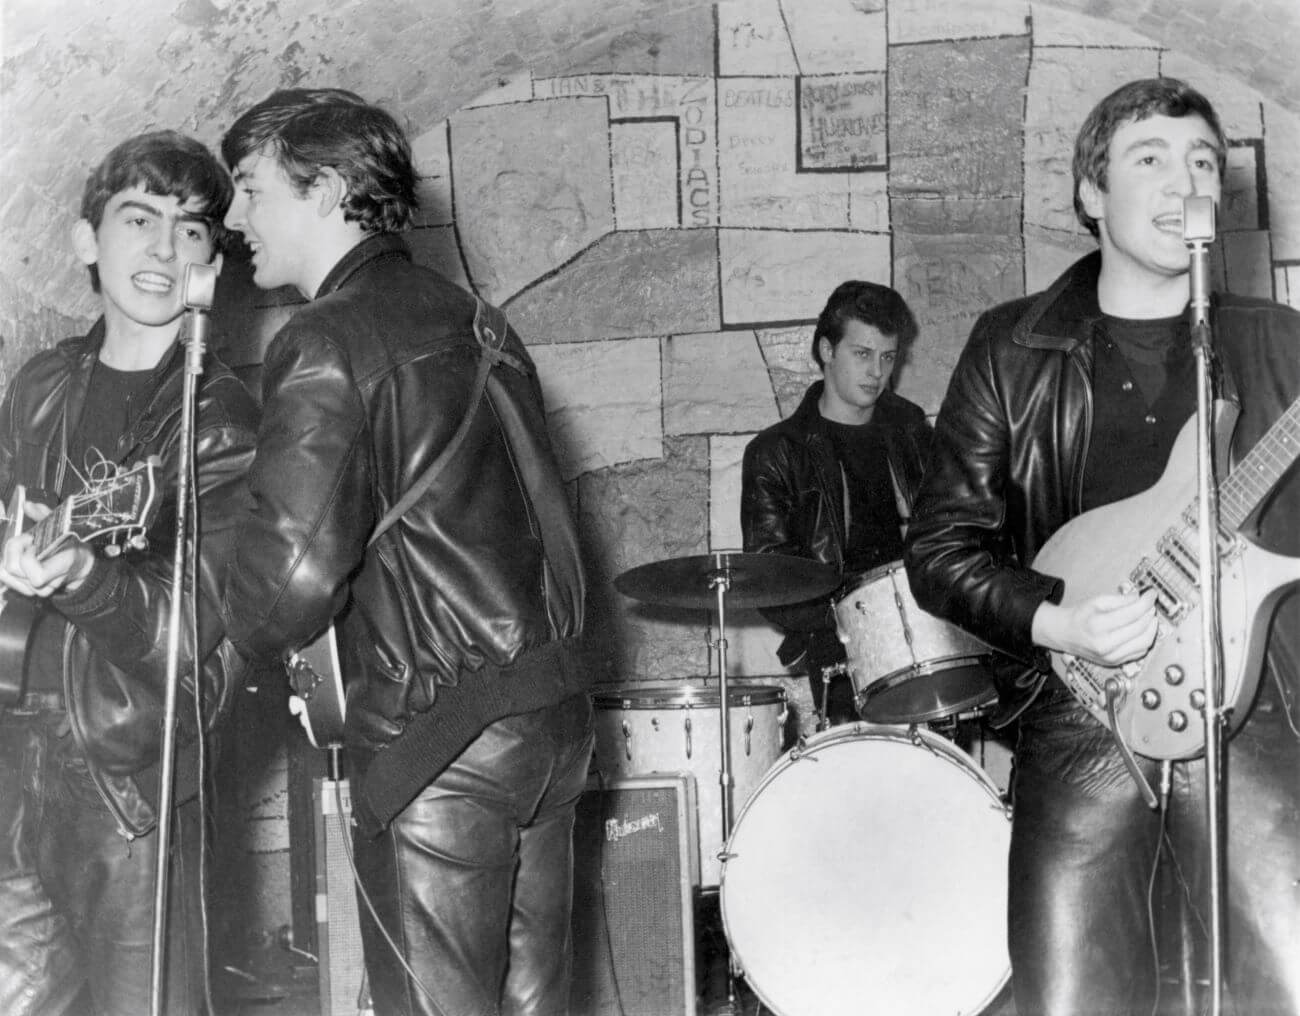 A black and white picture of George Harrison, Paul McCartney, Pete Best, and John Lennon performing in front of a stone wall.